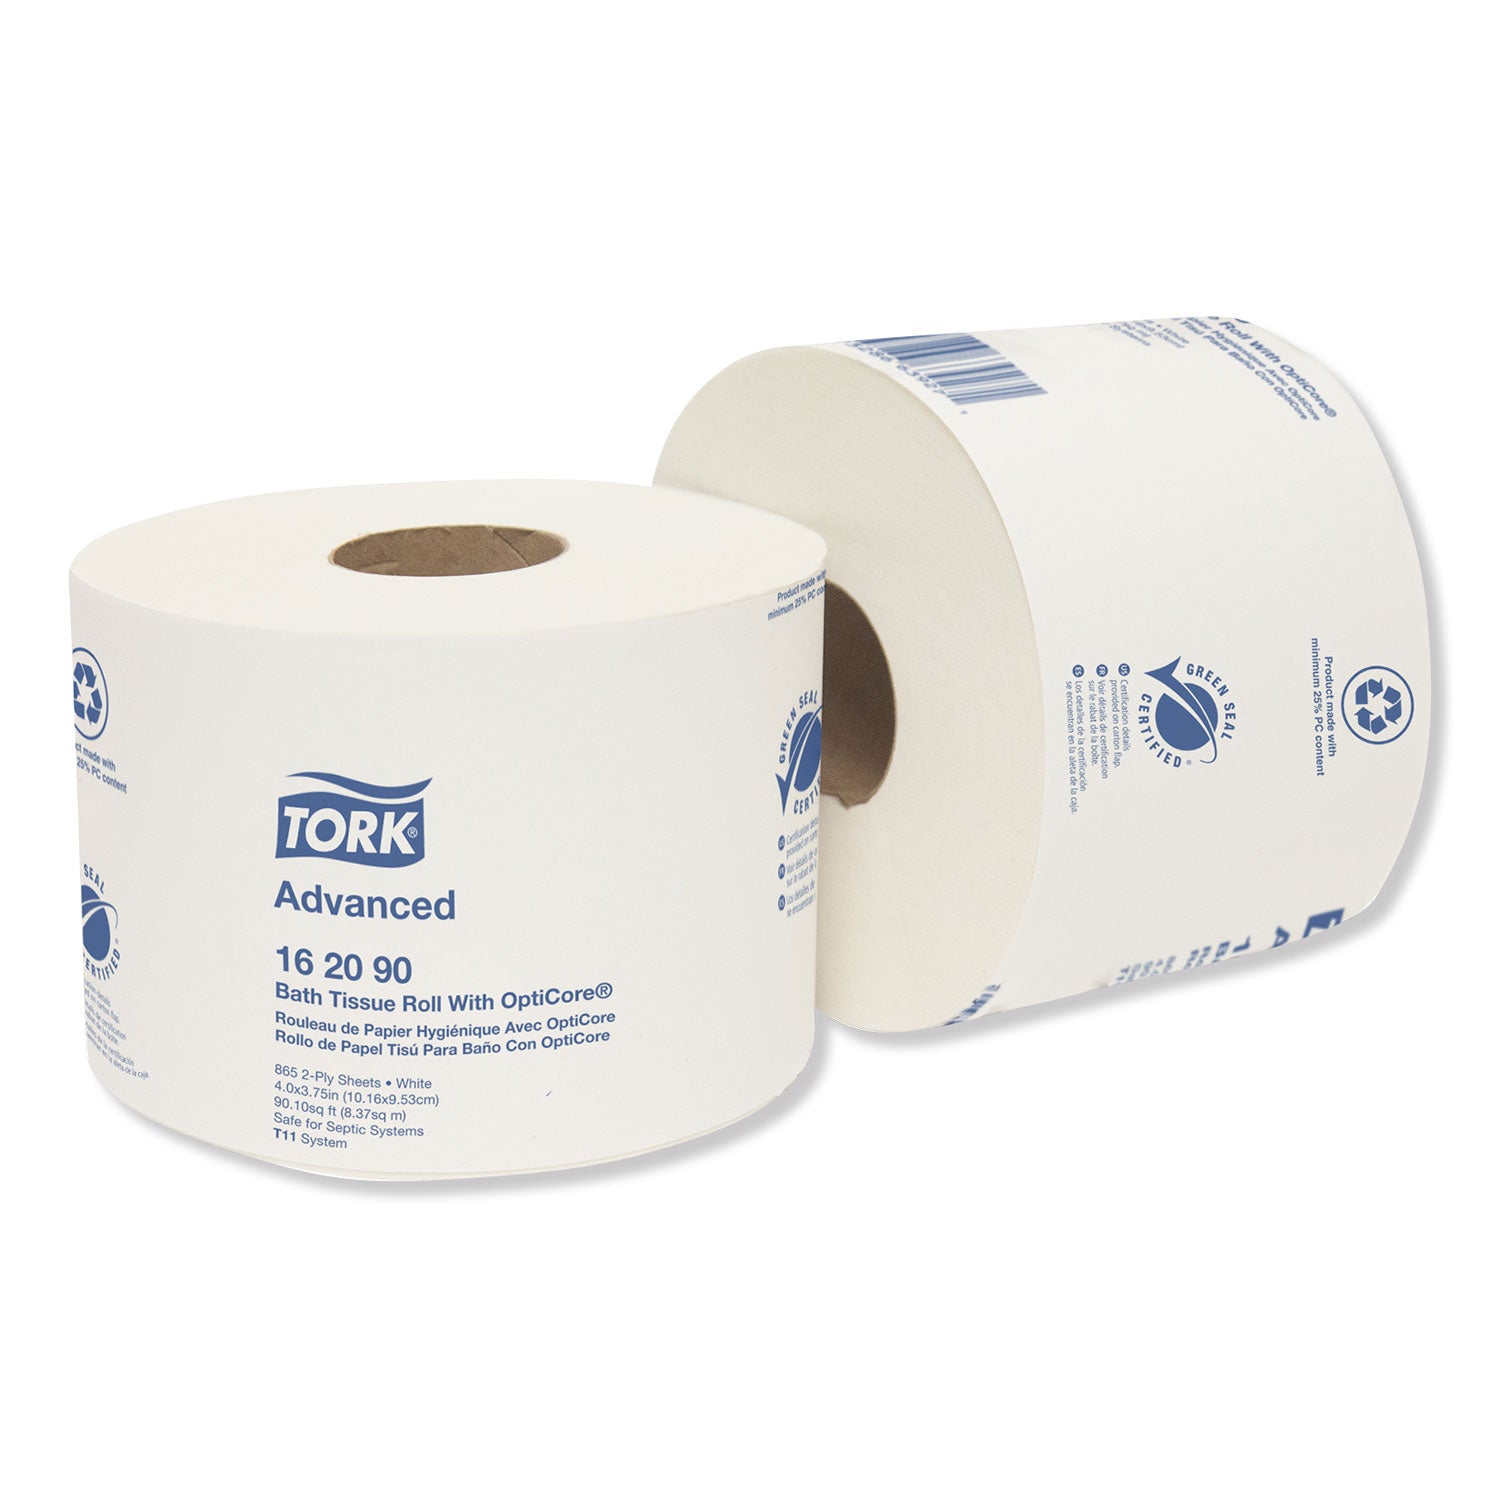 advanced-bath-tissue-roll-with-opticore-septic-safe-2-ply-white-865-sheets-roll-36-carton_trk162090 - 2